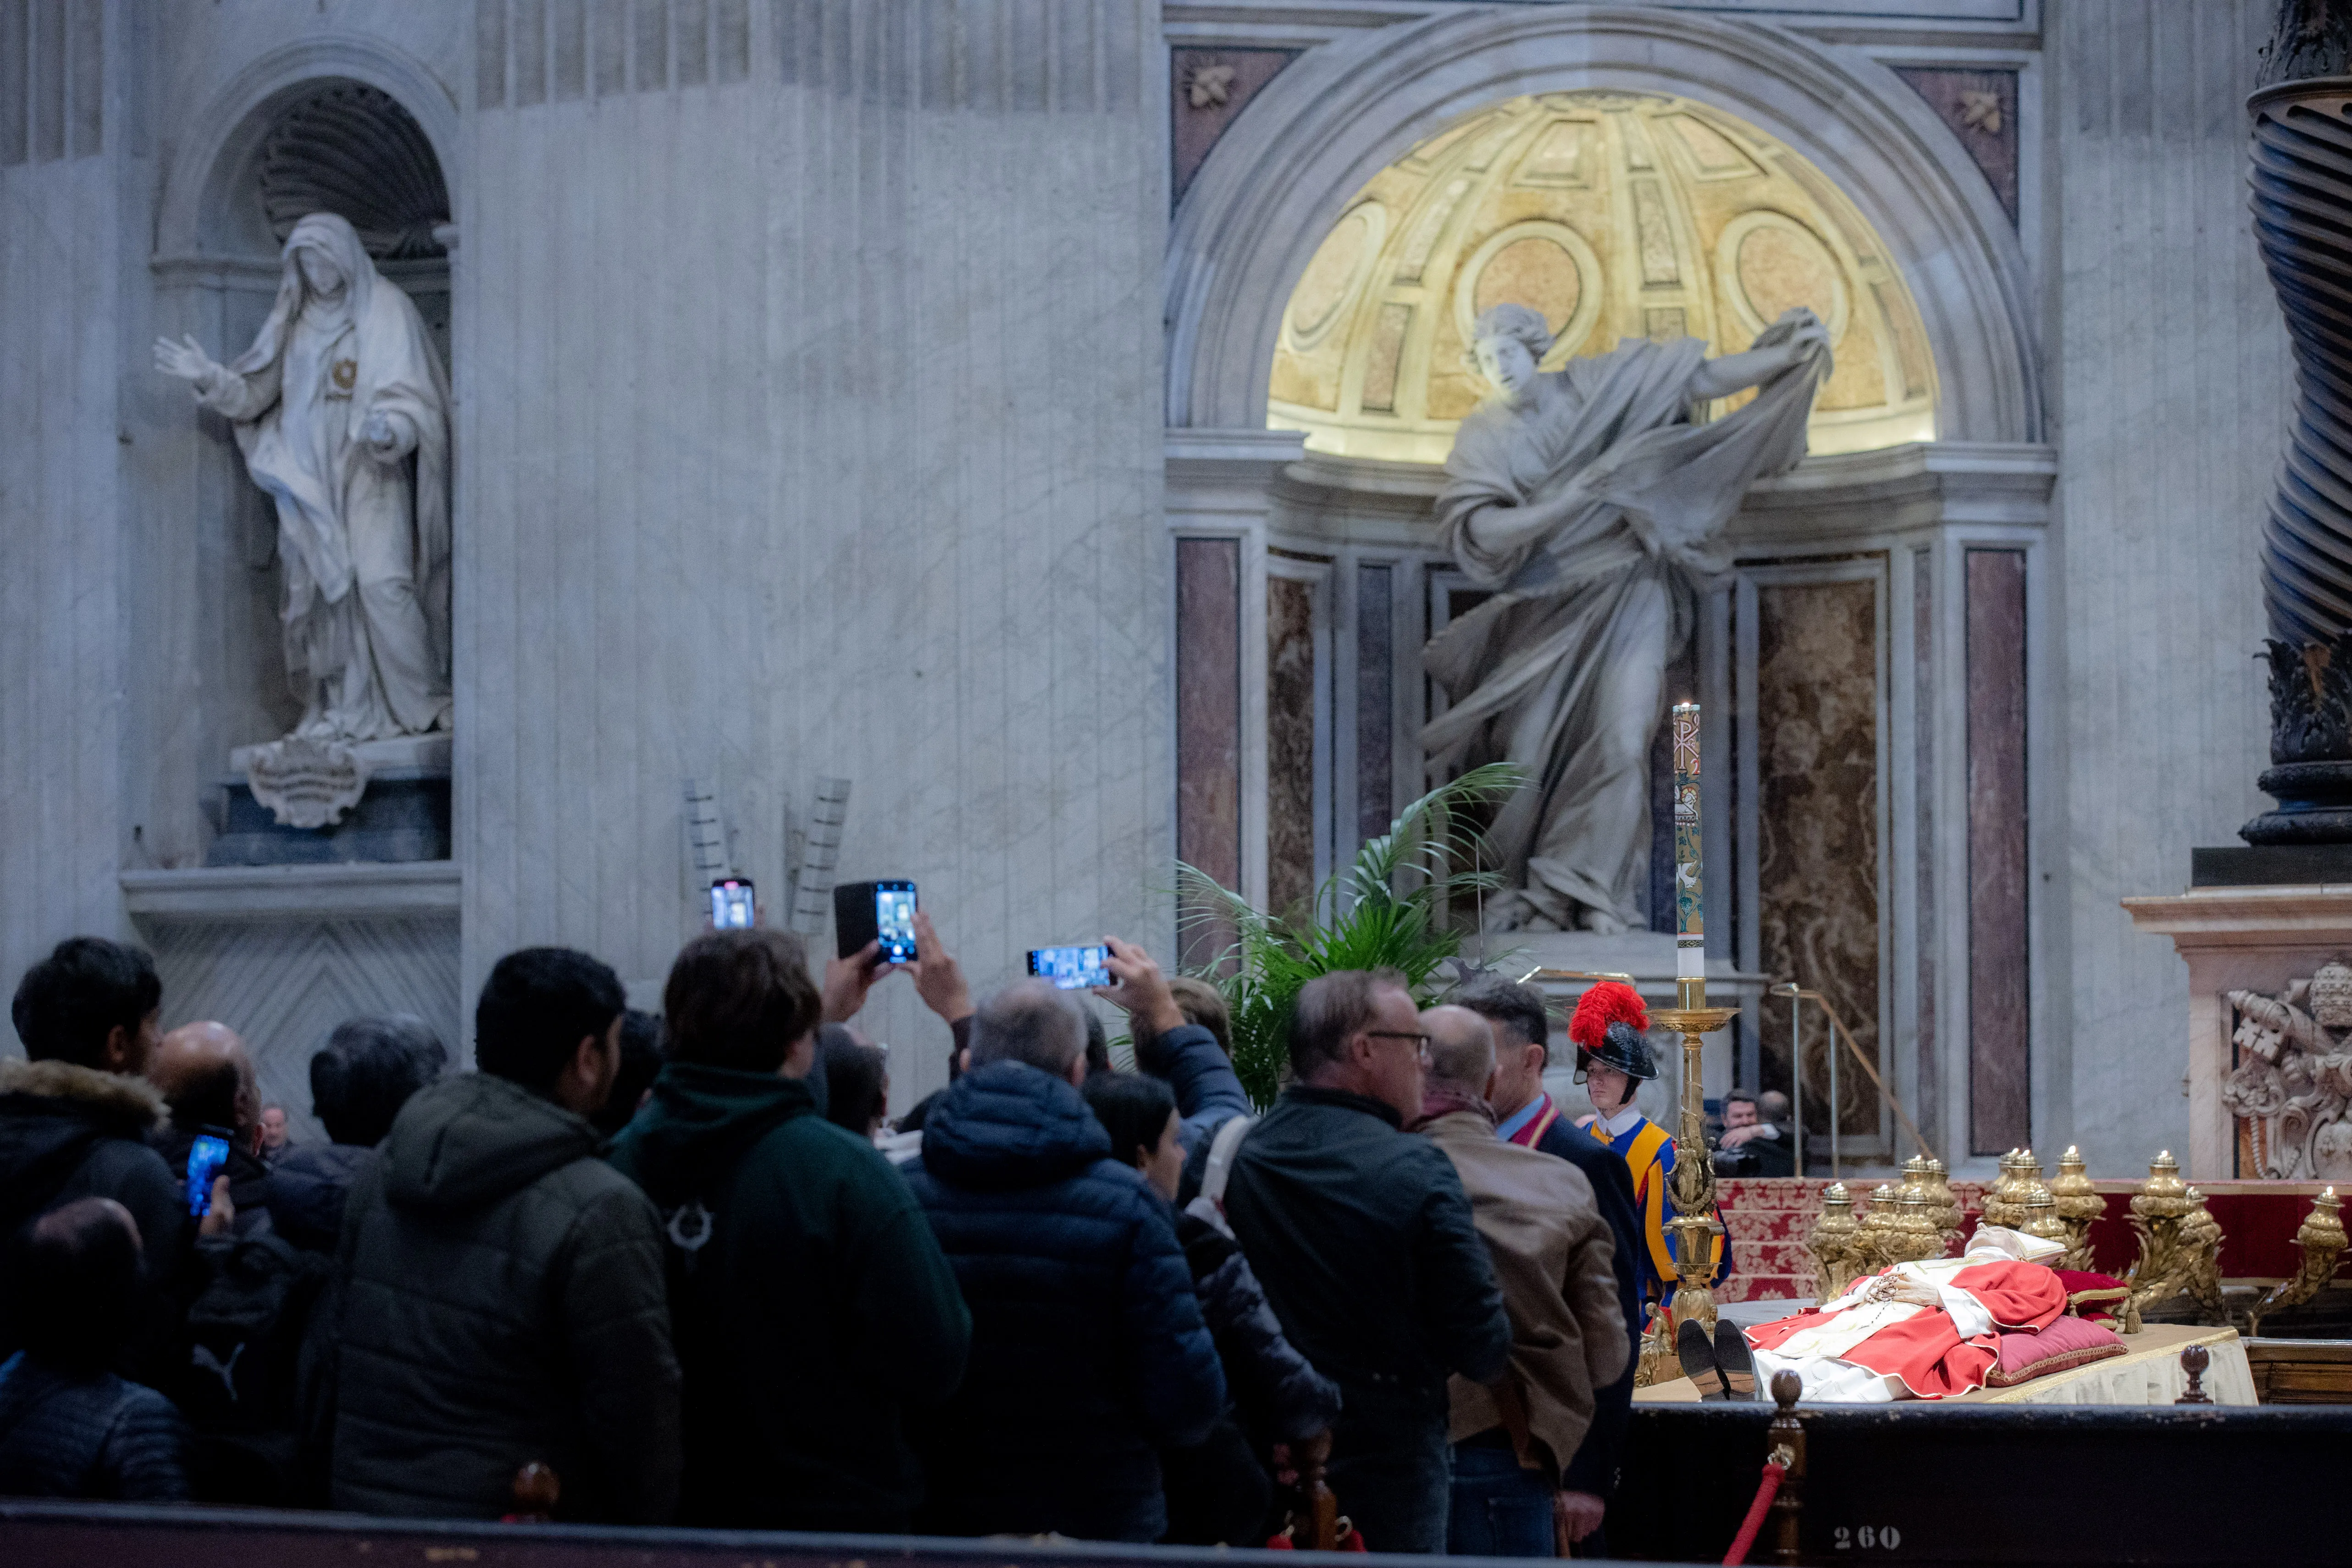 The mortal remains of Pope Emeritus Benedict XVI were moved early in the morning on Jan. 2, 2023, from his former residence in the Vatican's Mater Ecclesiae Monastery to St. Peter's Basilica, where the late pope is lying in state through Jan. 4. Thousands waited in line to pay their respects. Daniel Ibañez / EWTN